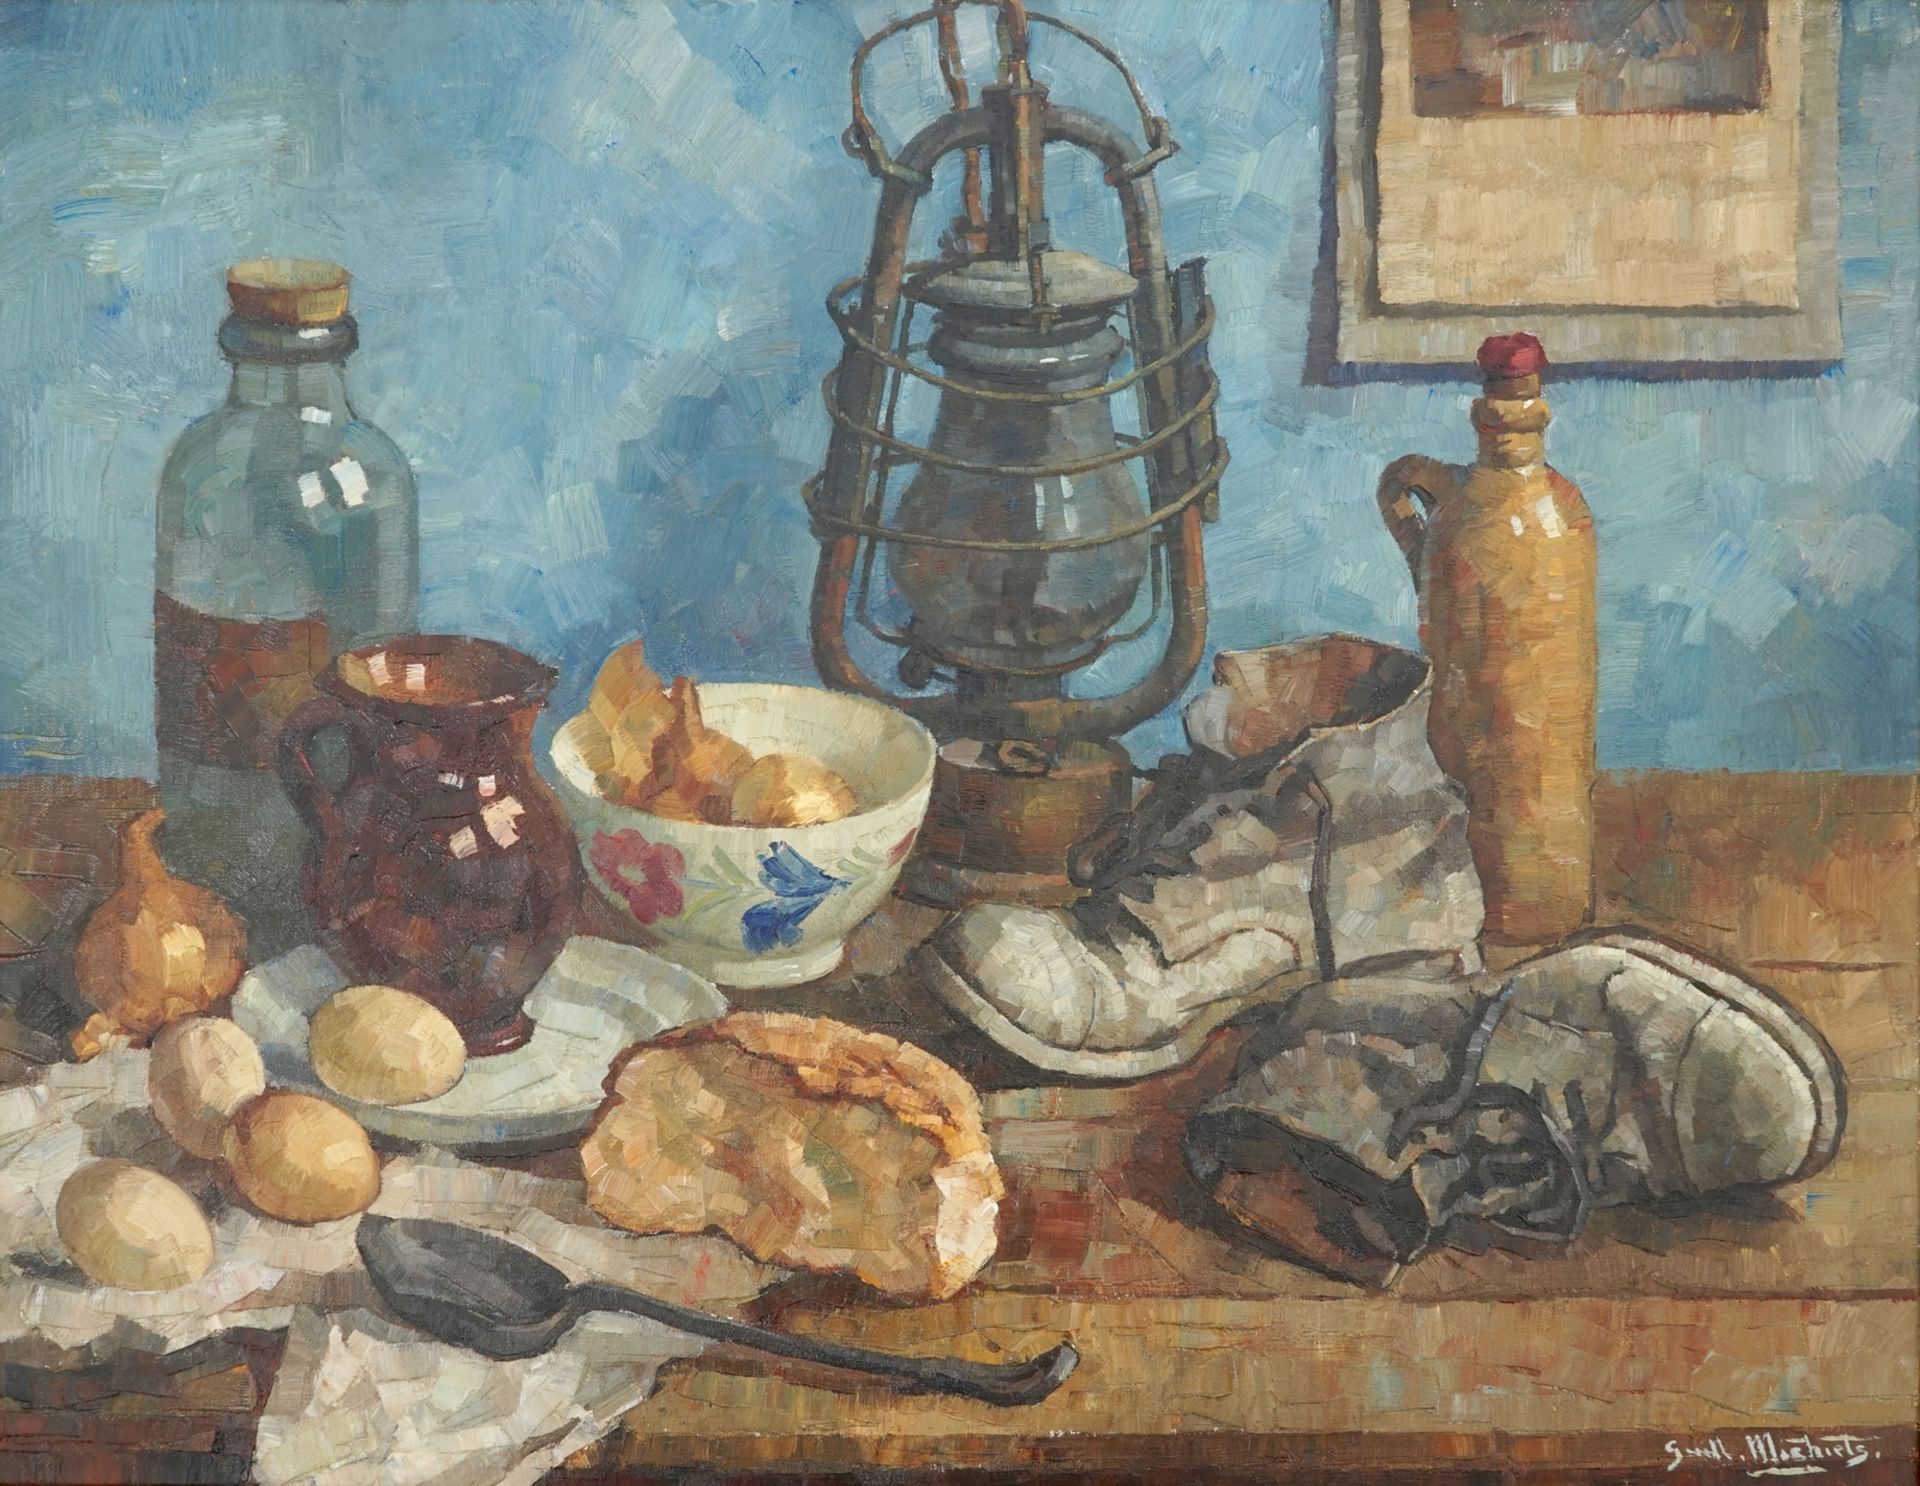 Guillaume Michiels (1909-1997), a still life with a marine lantern, oil on canvas in profiled